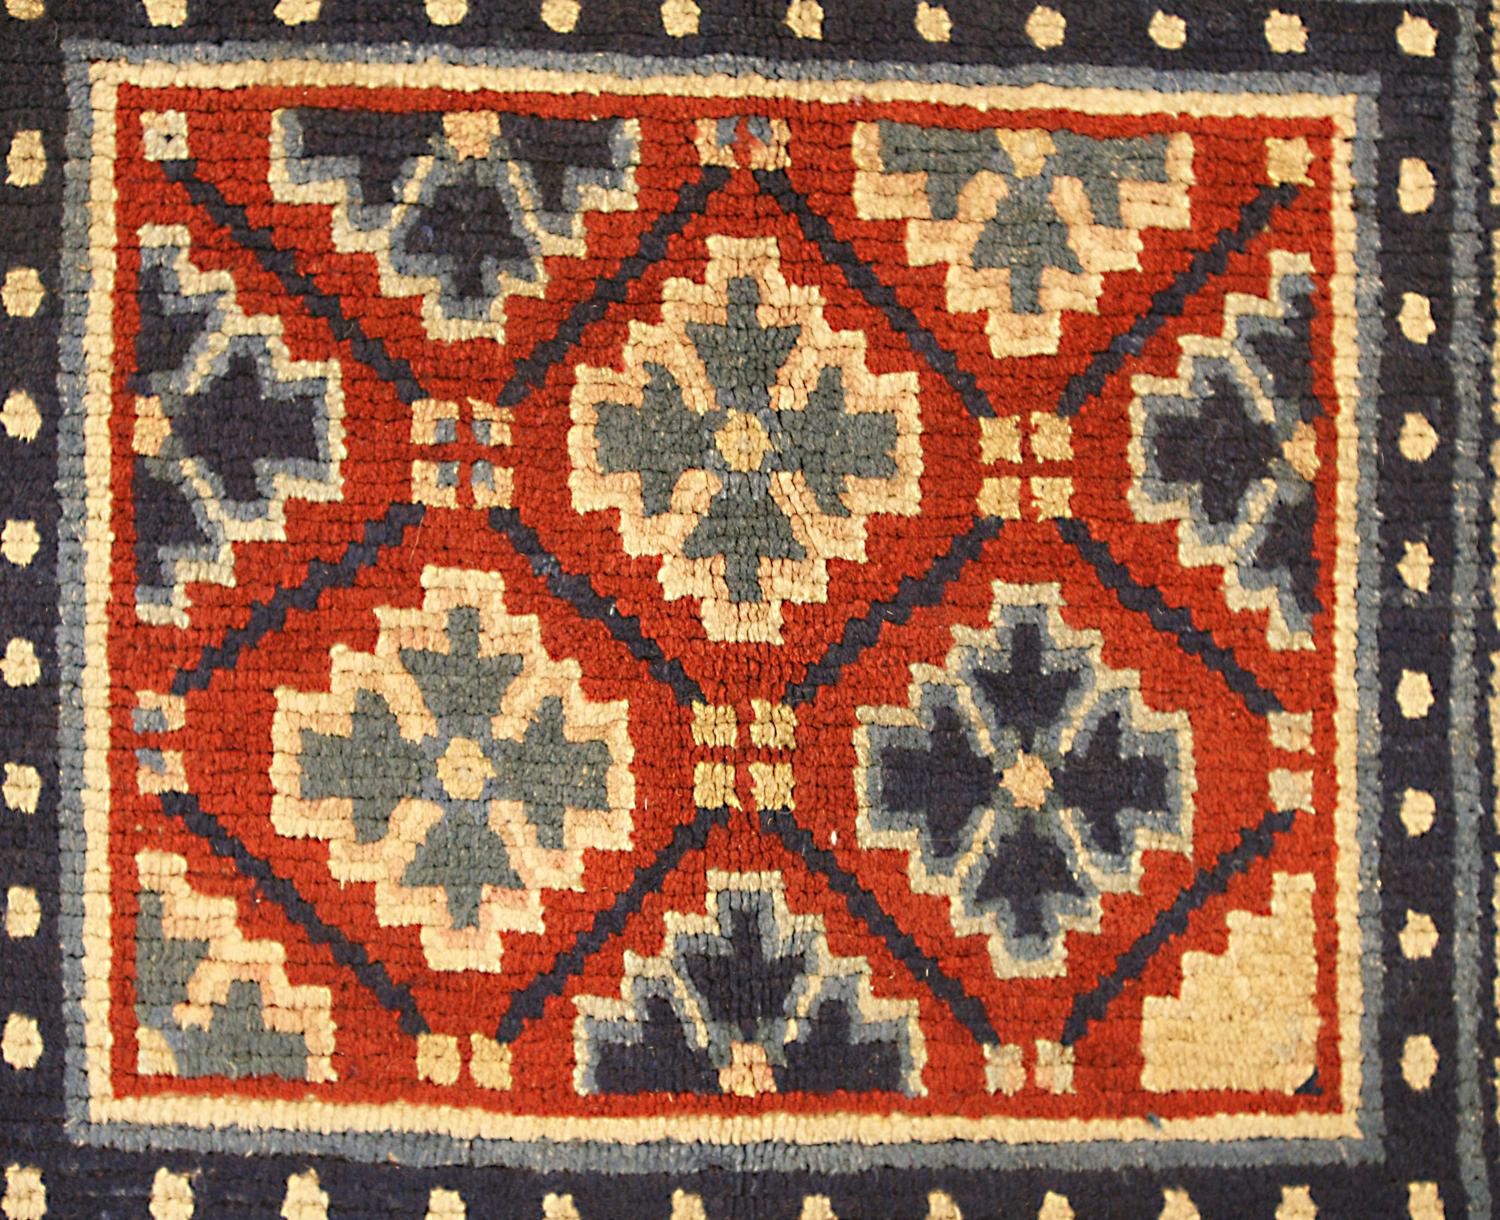 This is an antique Tibetan mat rug woven during the beginning of the 20th century circa 1900-1920 and measures 81x 68CM in size. its field is comprised of lattice design using geometric motifs which represent snowflakes set on a red background